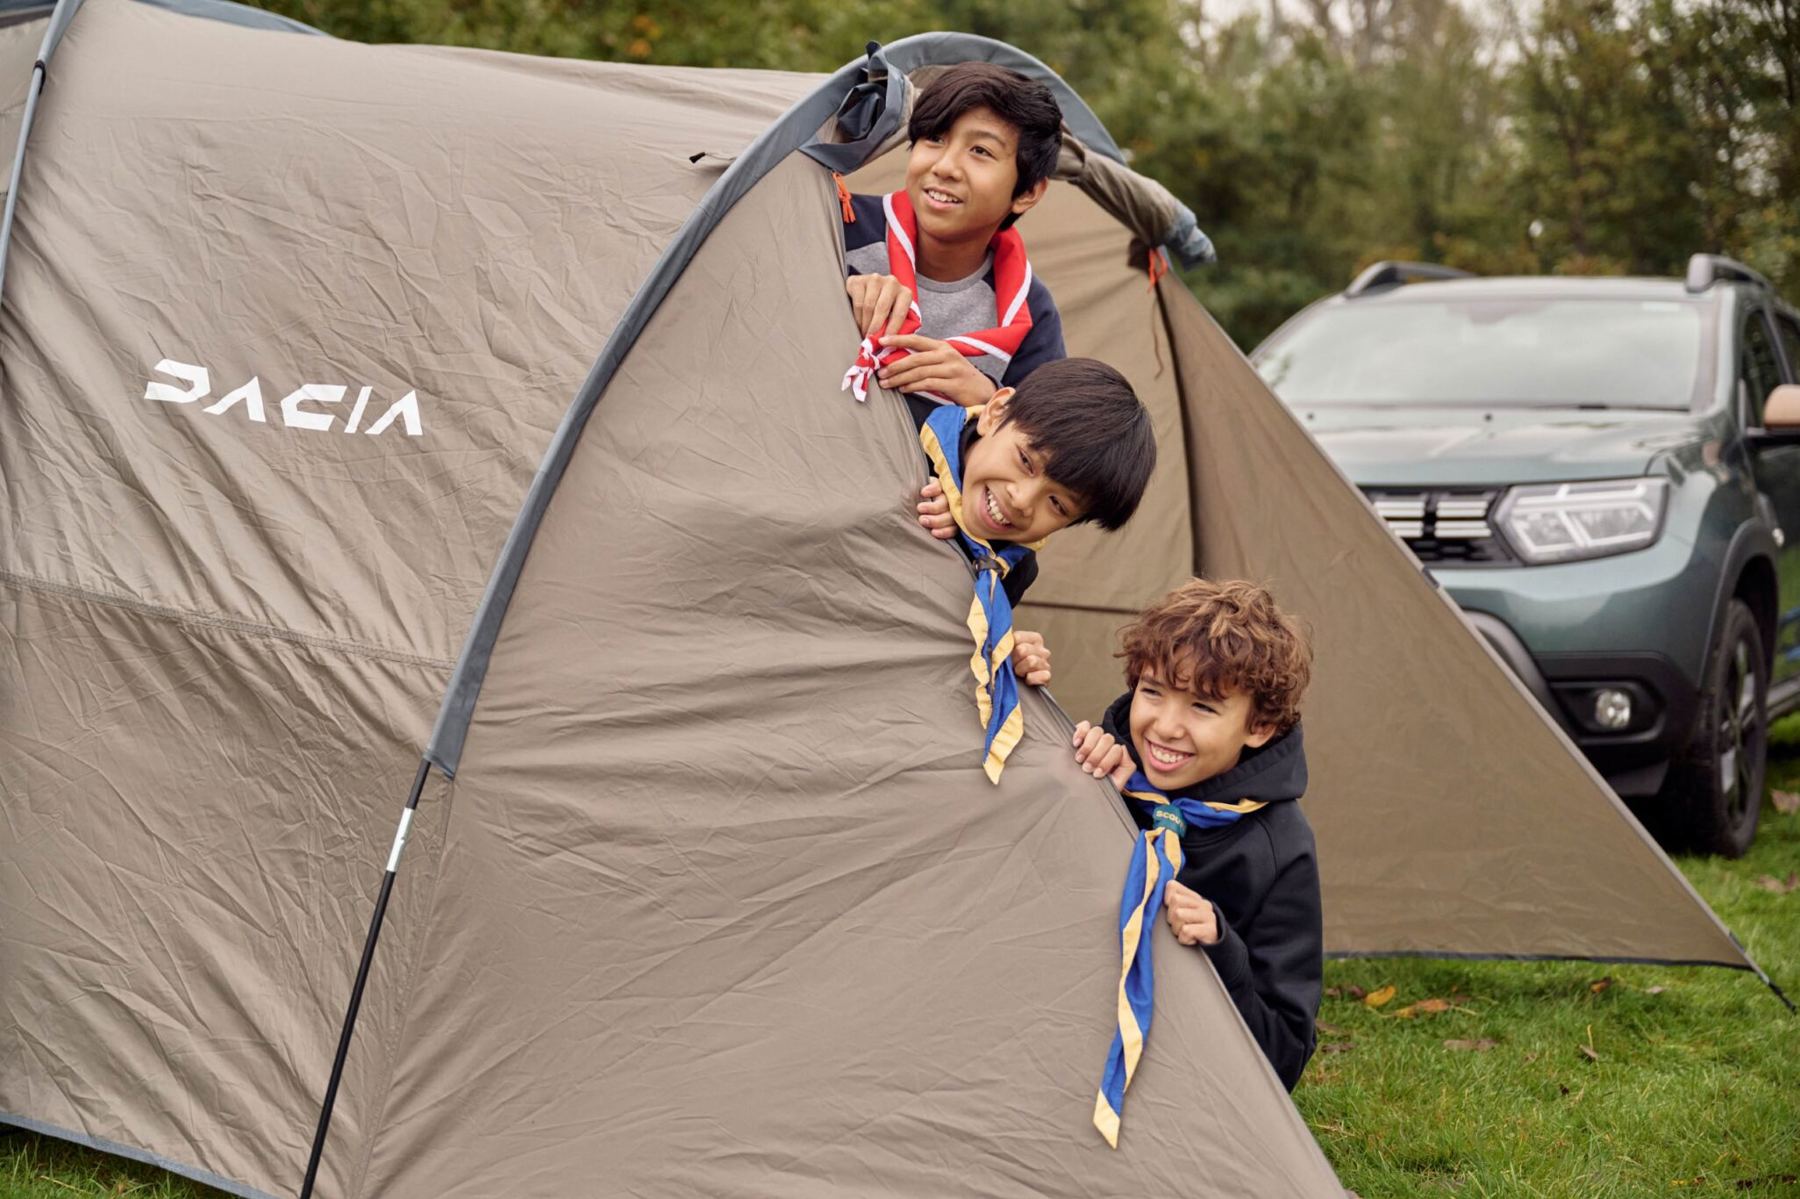 The image shows three Scouts peering out of a beige tent with the Dacia logo in white on the slide. The camera is facing the tent side on, with the three Scouts smiling and wearing neckers. There's a Dacia car just behind the tent.